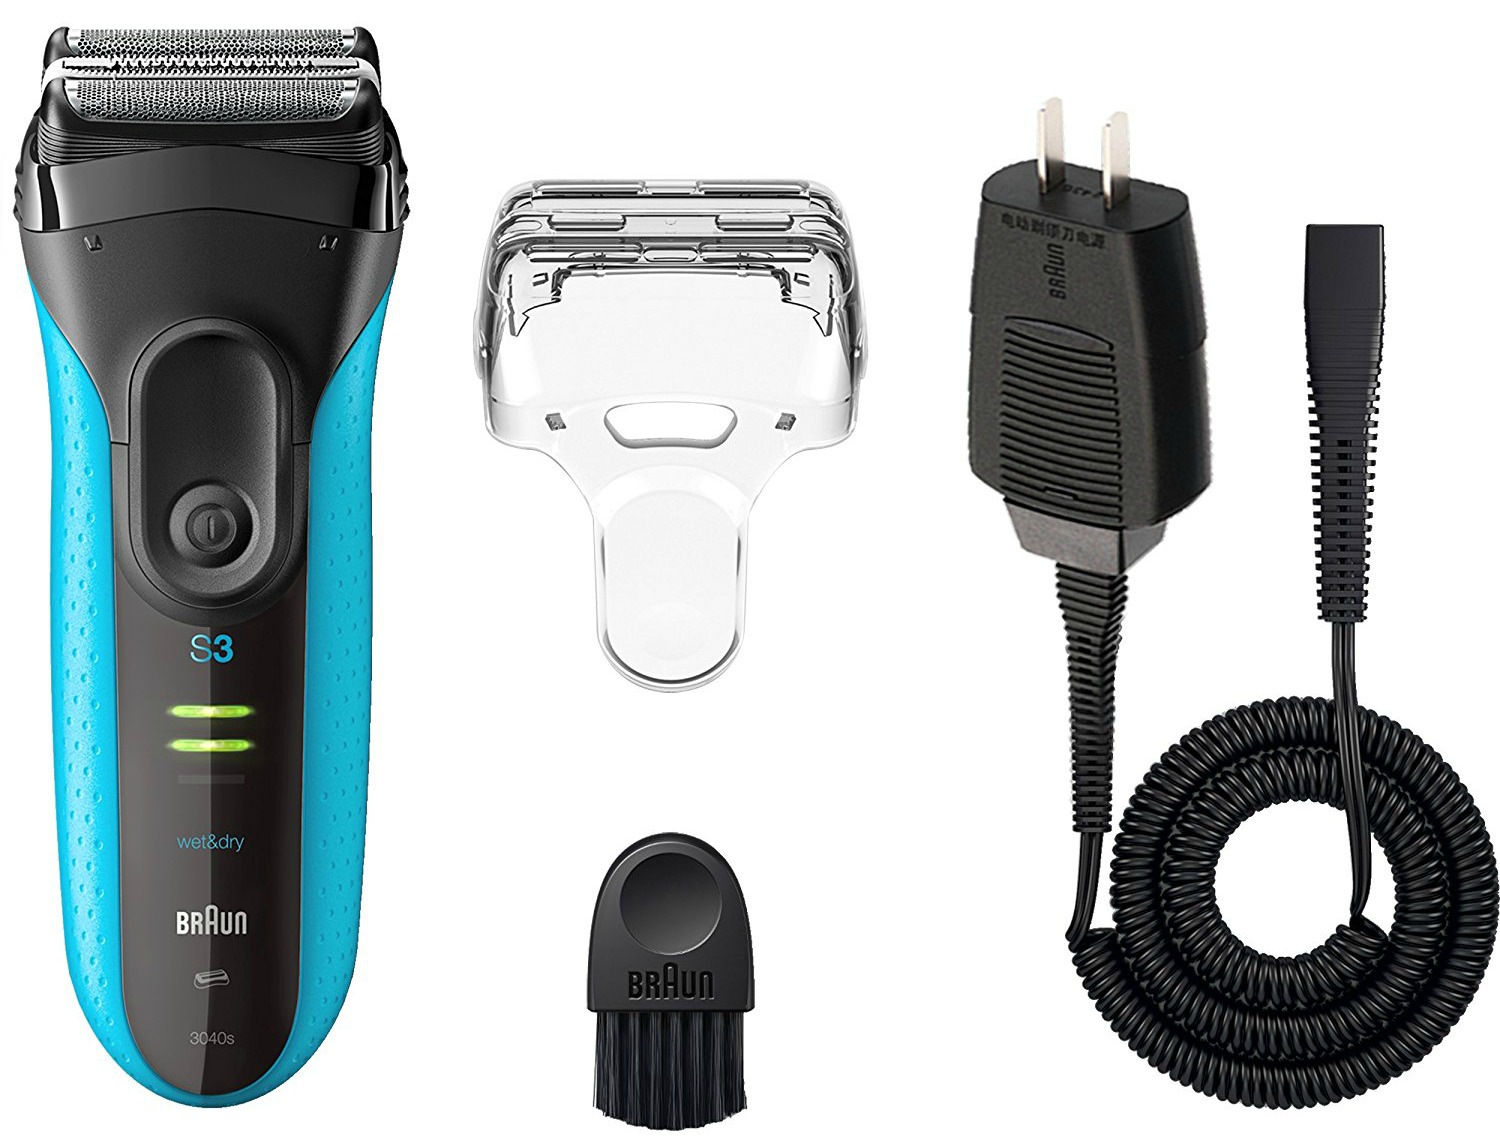 braun-electric-rechargeable-shaver-21-49-shipped-after-rebate-reg